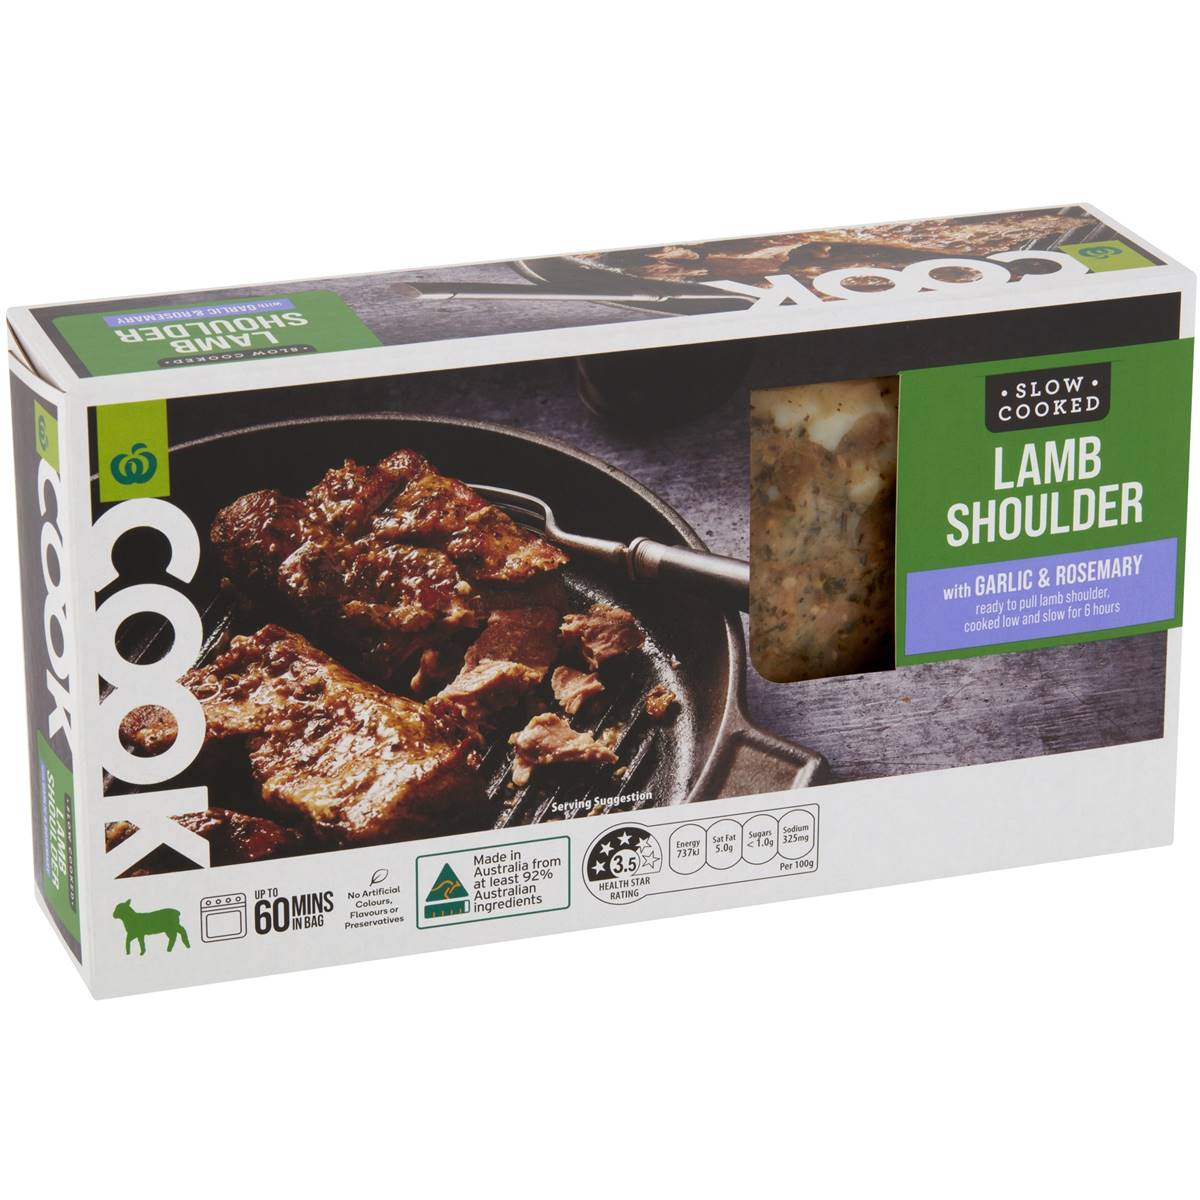 Calories in Woolworths Cook Lamb Shoulder With Garlic & Rosemary